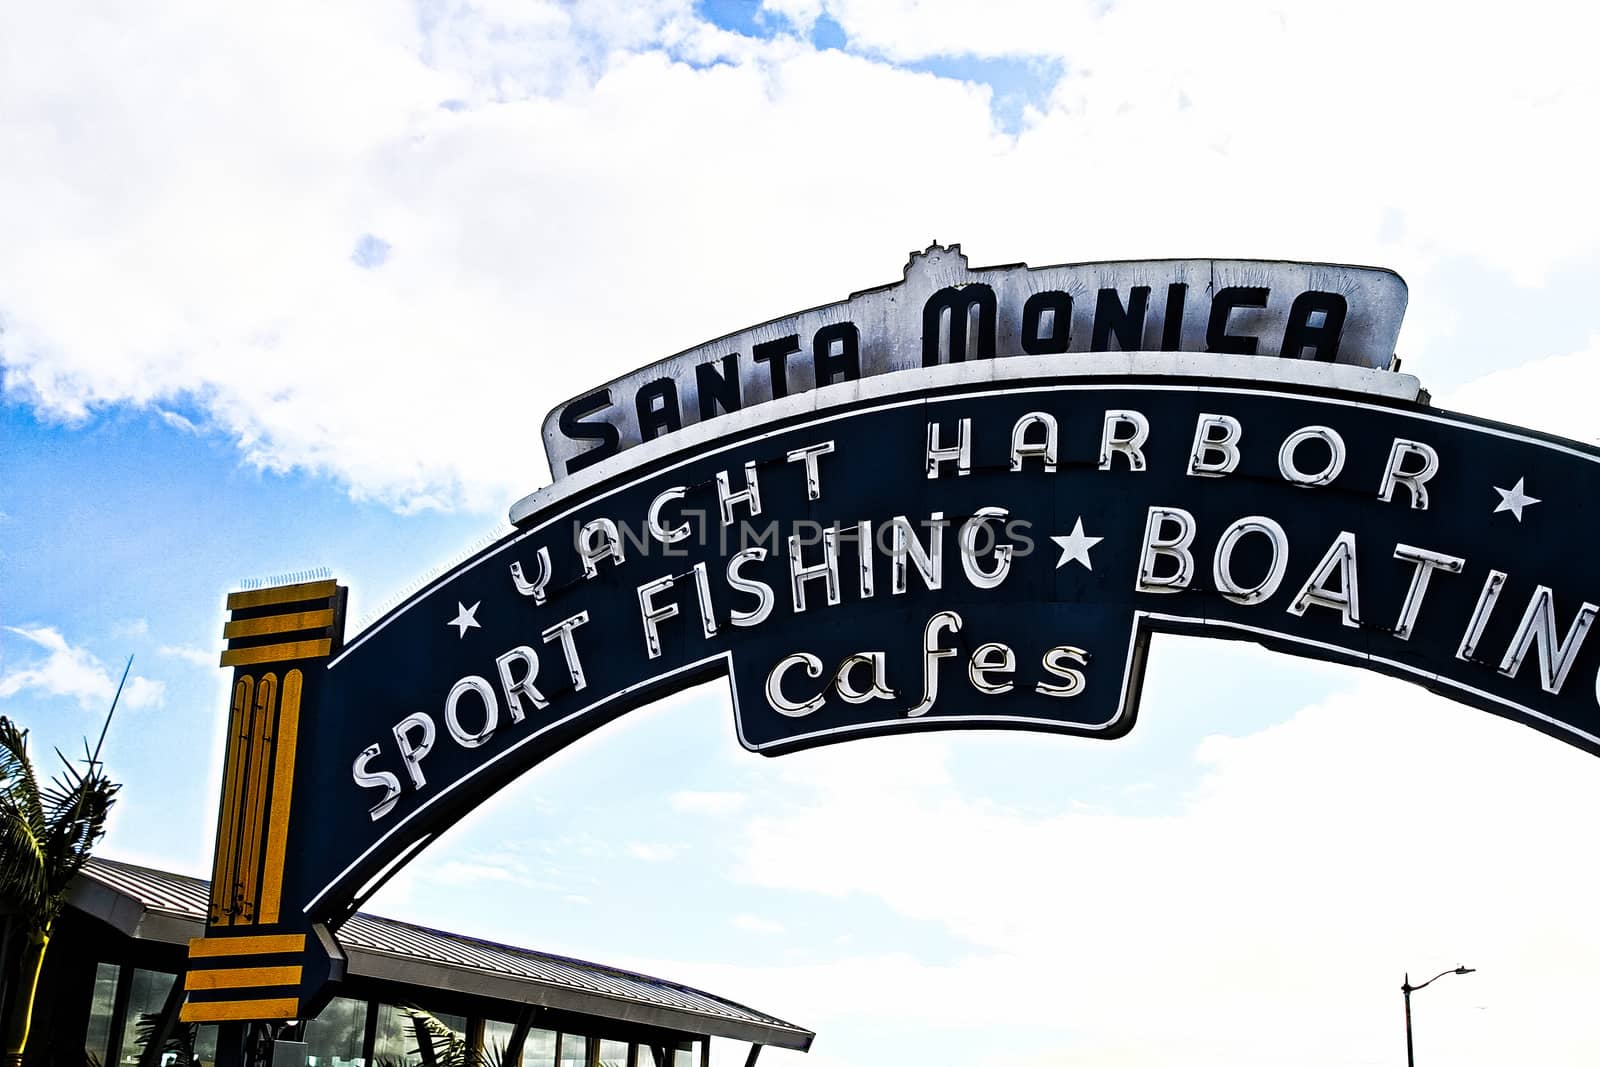 Los Angeles,CA/USA - Oct 29, 2015 : Welcoming arch in Santa Monica, California. The city has 3.5 miles of beach locations.Santa Monica Pier, Picture of the entrance with the famous arch sign. by USA-TARO